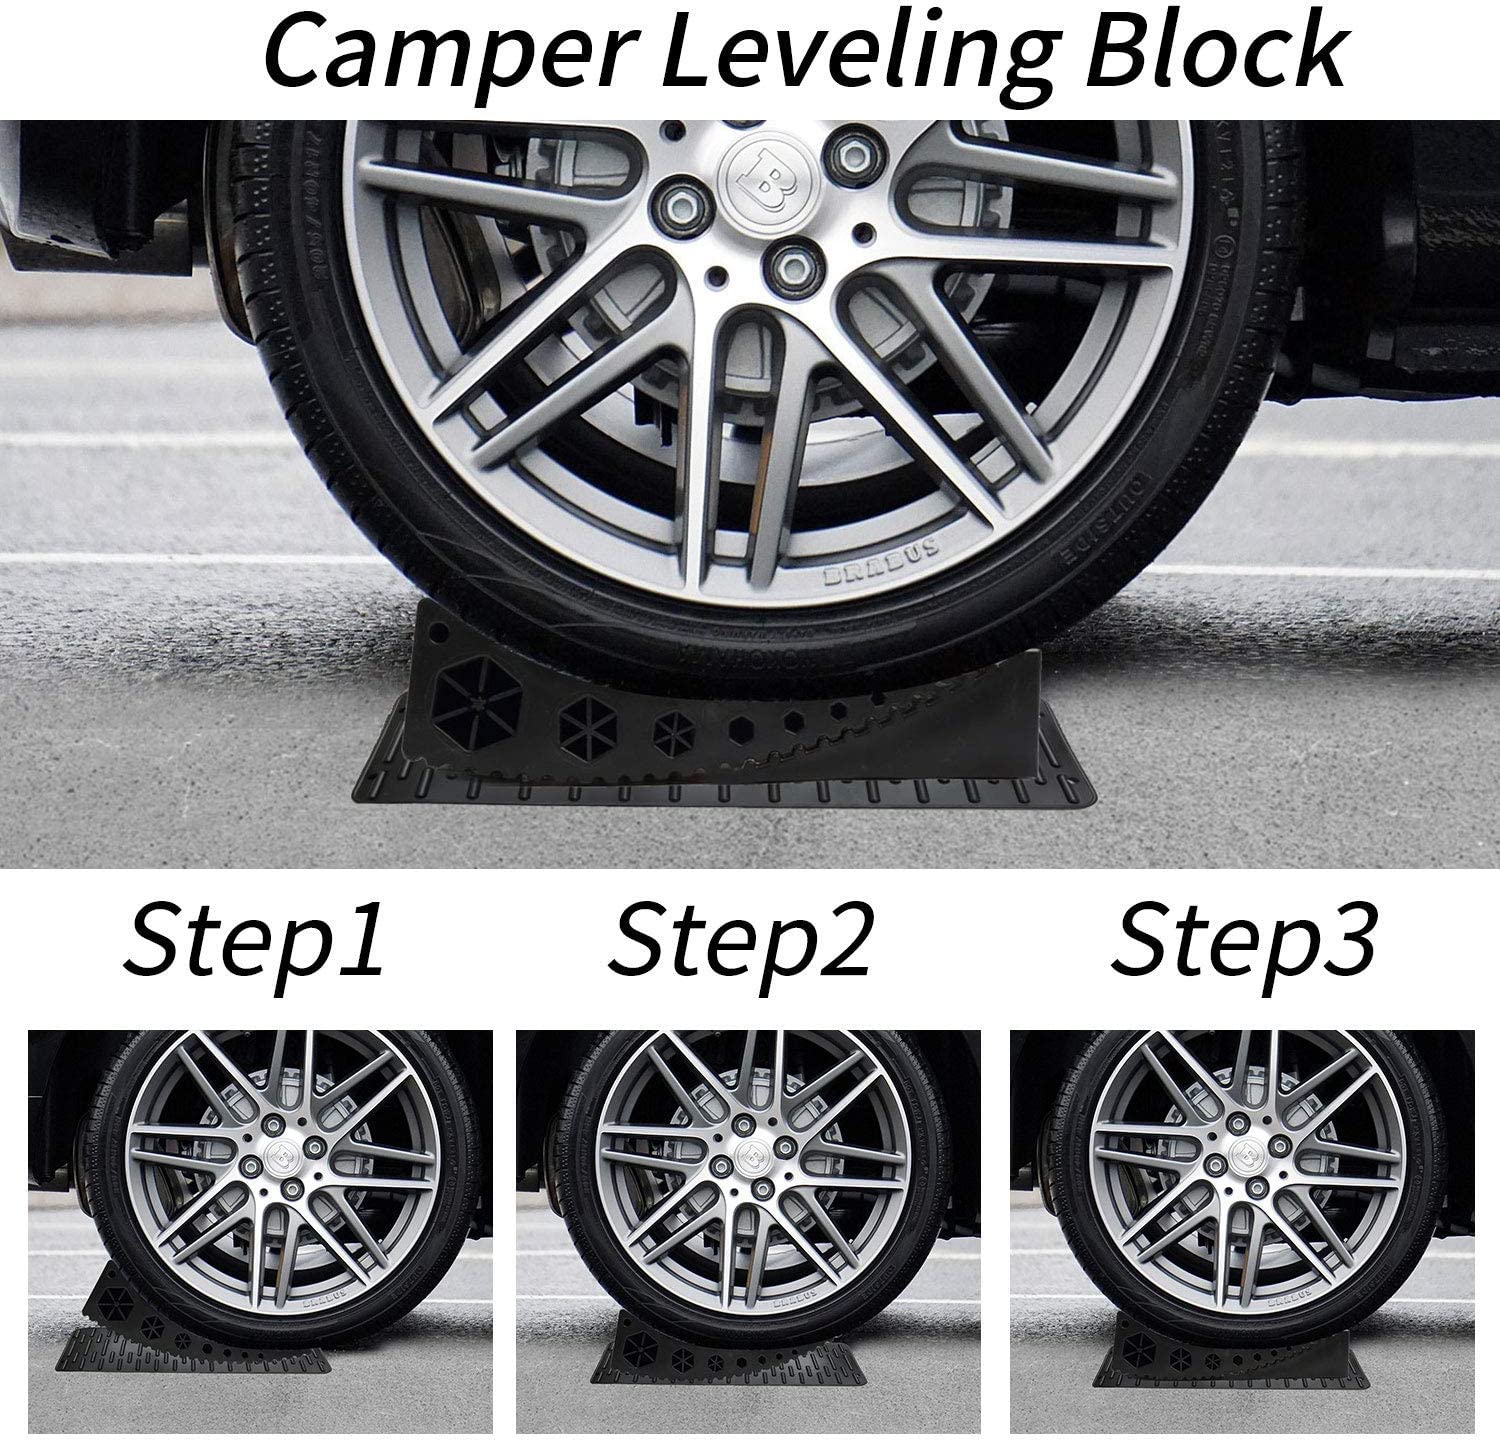 Homeon Wheels Camper Leveler Camper Leveling Blocks Work for RV Include 2 Curved Levelers,2 Chocks with Built-in Handle,2 Mats,1 Level and Bag,Easily Level up Travel Trailer Up to 35,000 LBS 